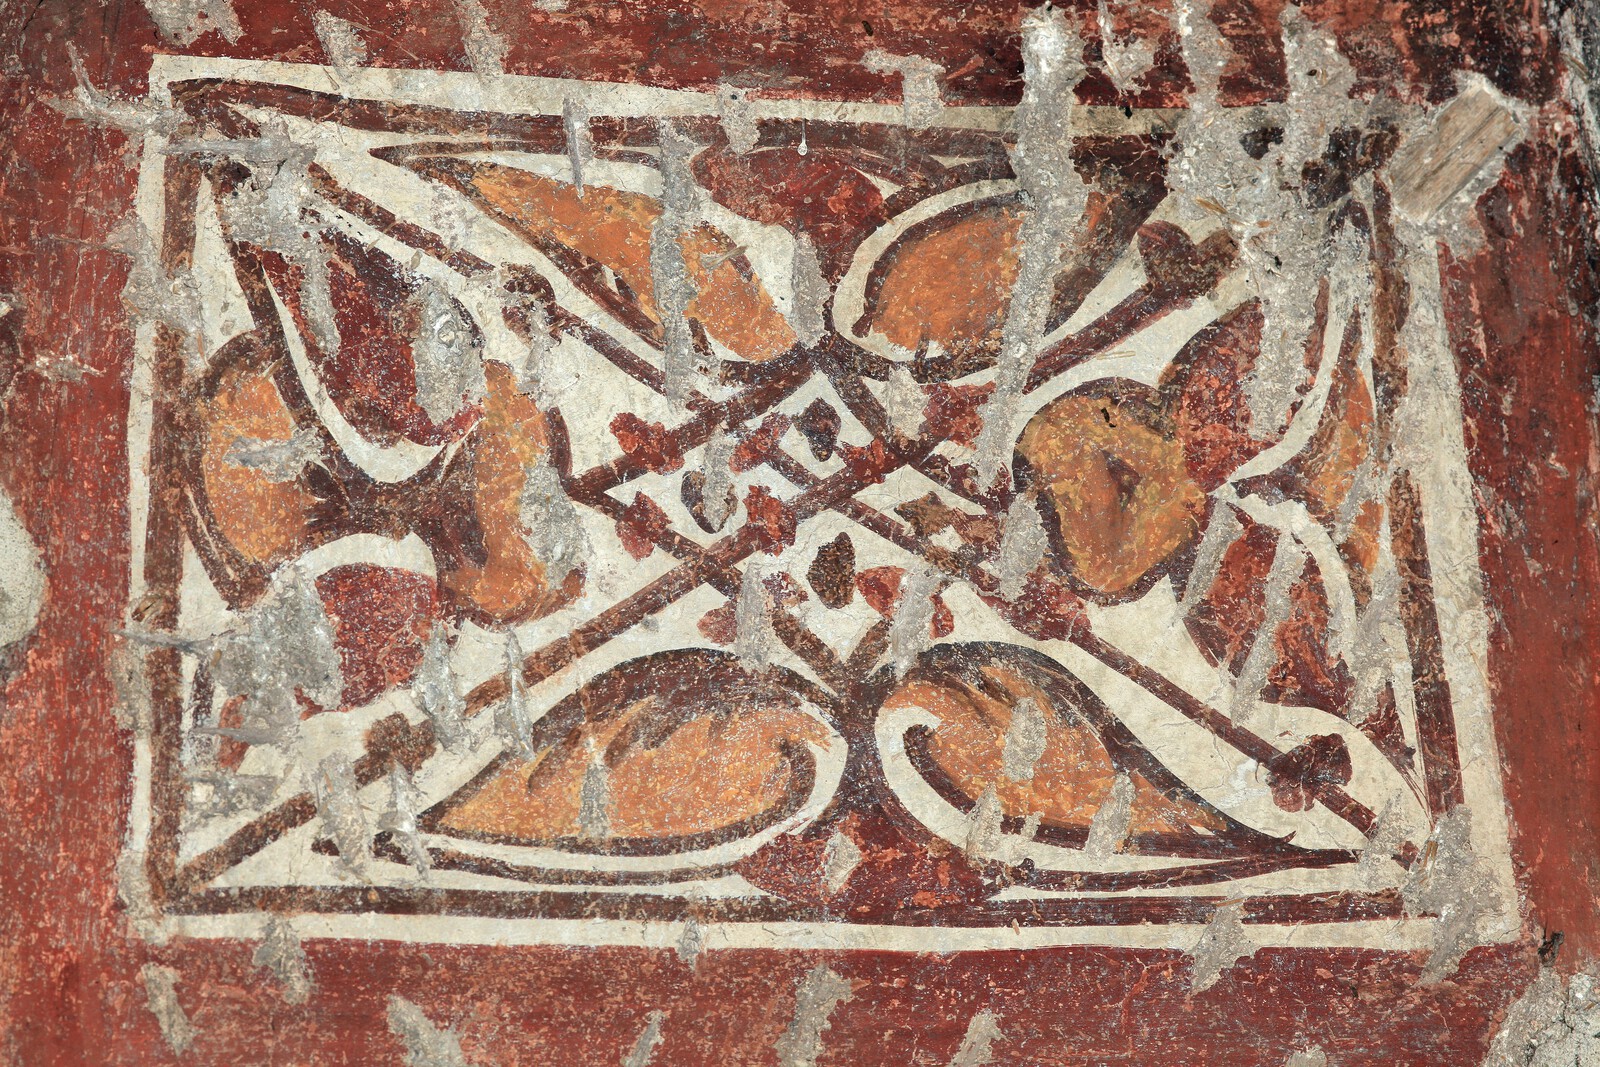 Ornament  of the south doorjamb